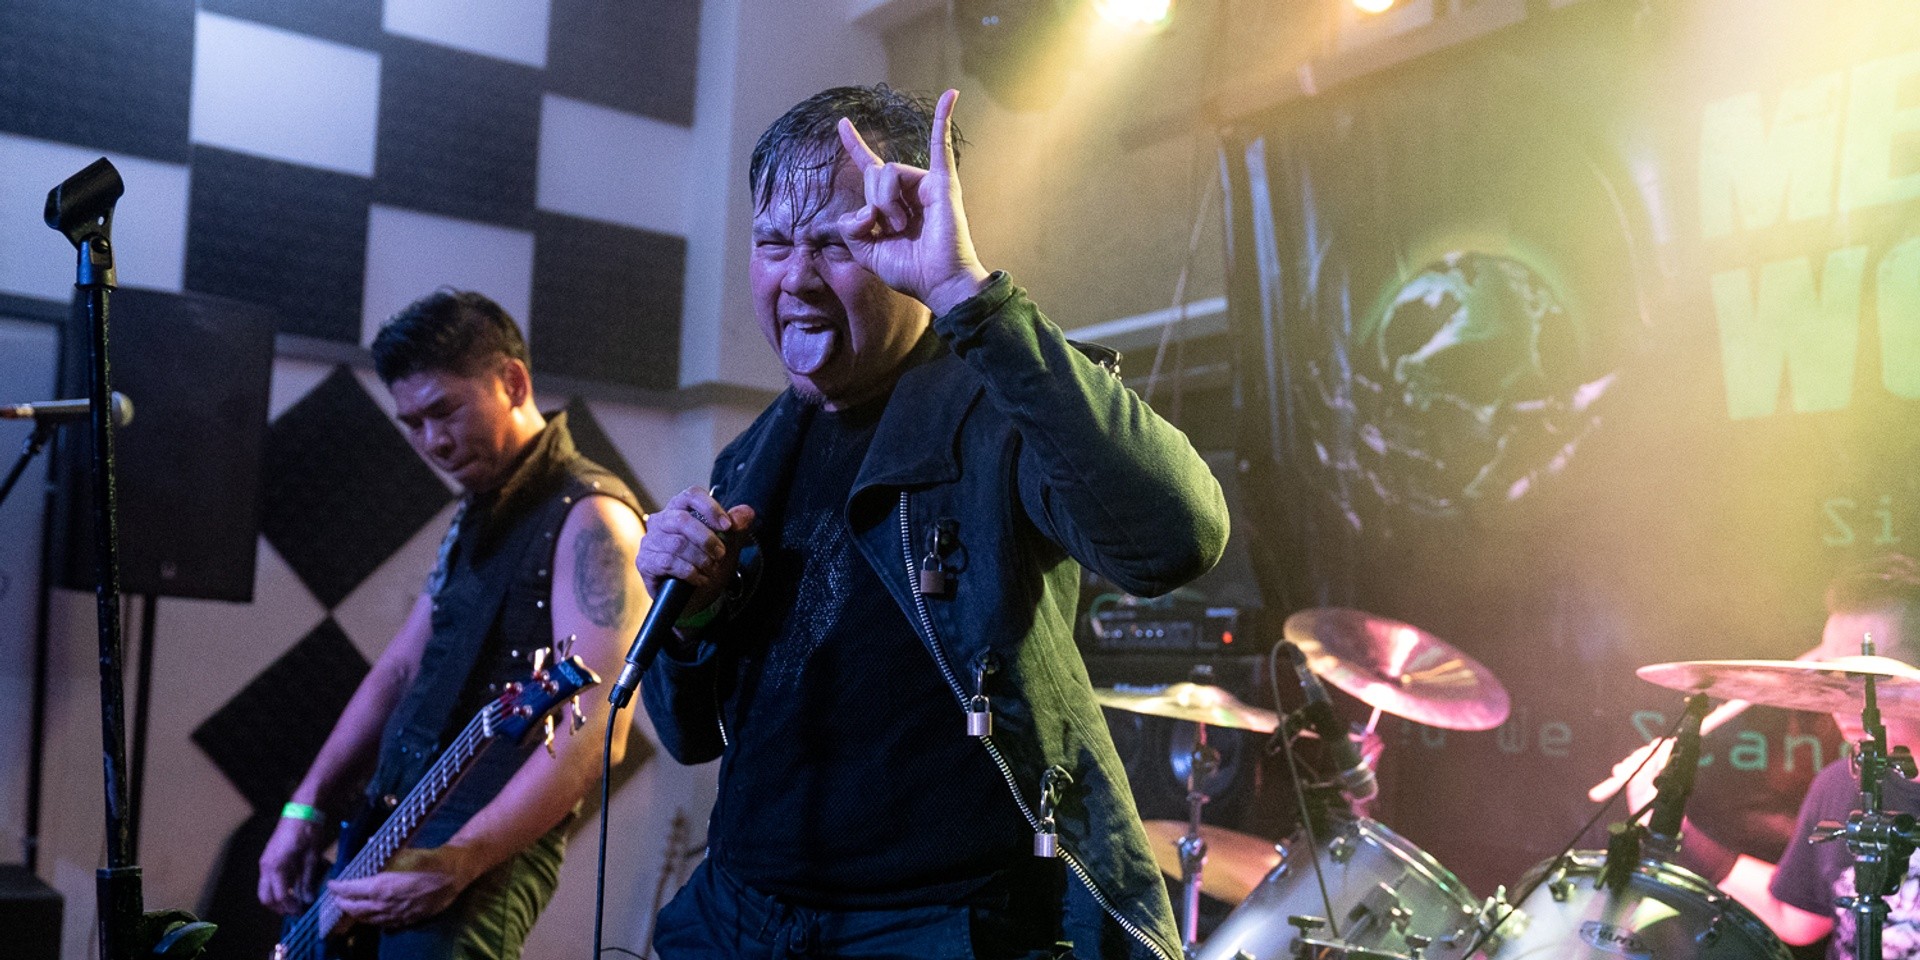 Chaos and camaraderie at Metal United World Wide Singapore - photo gallery